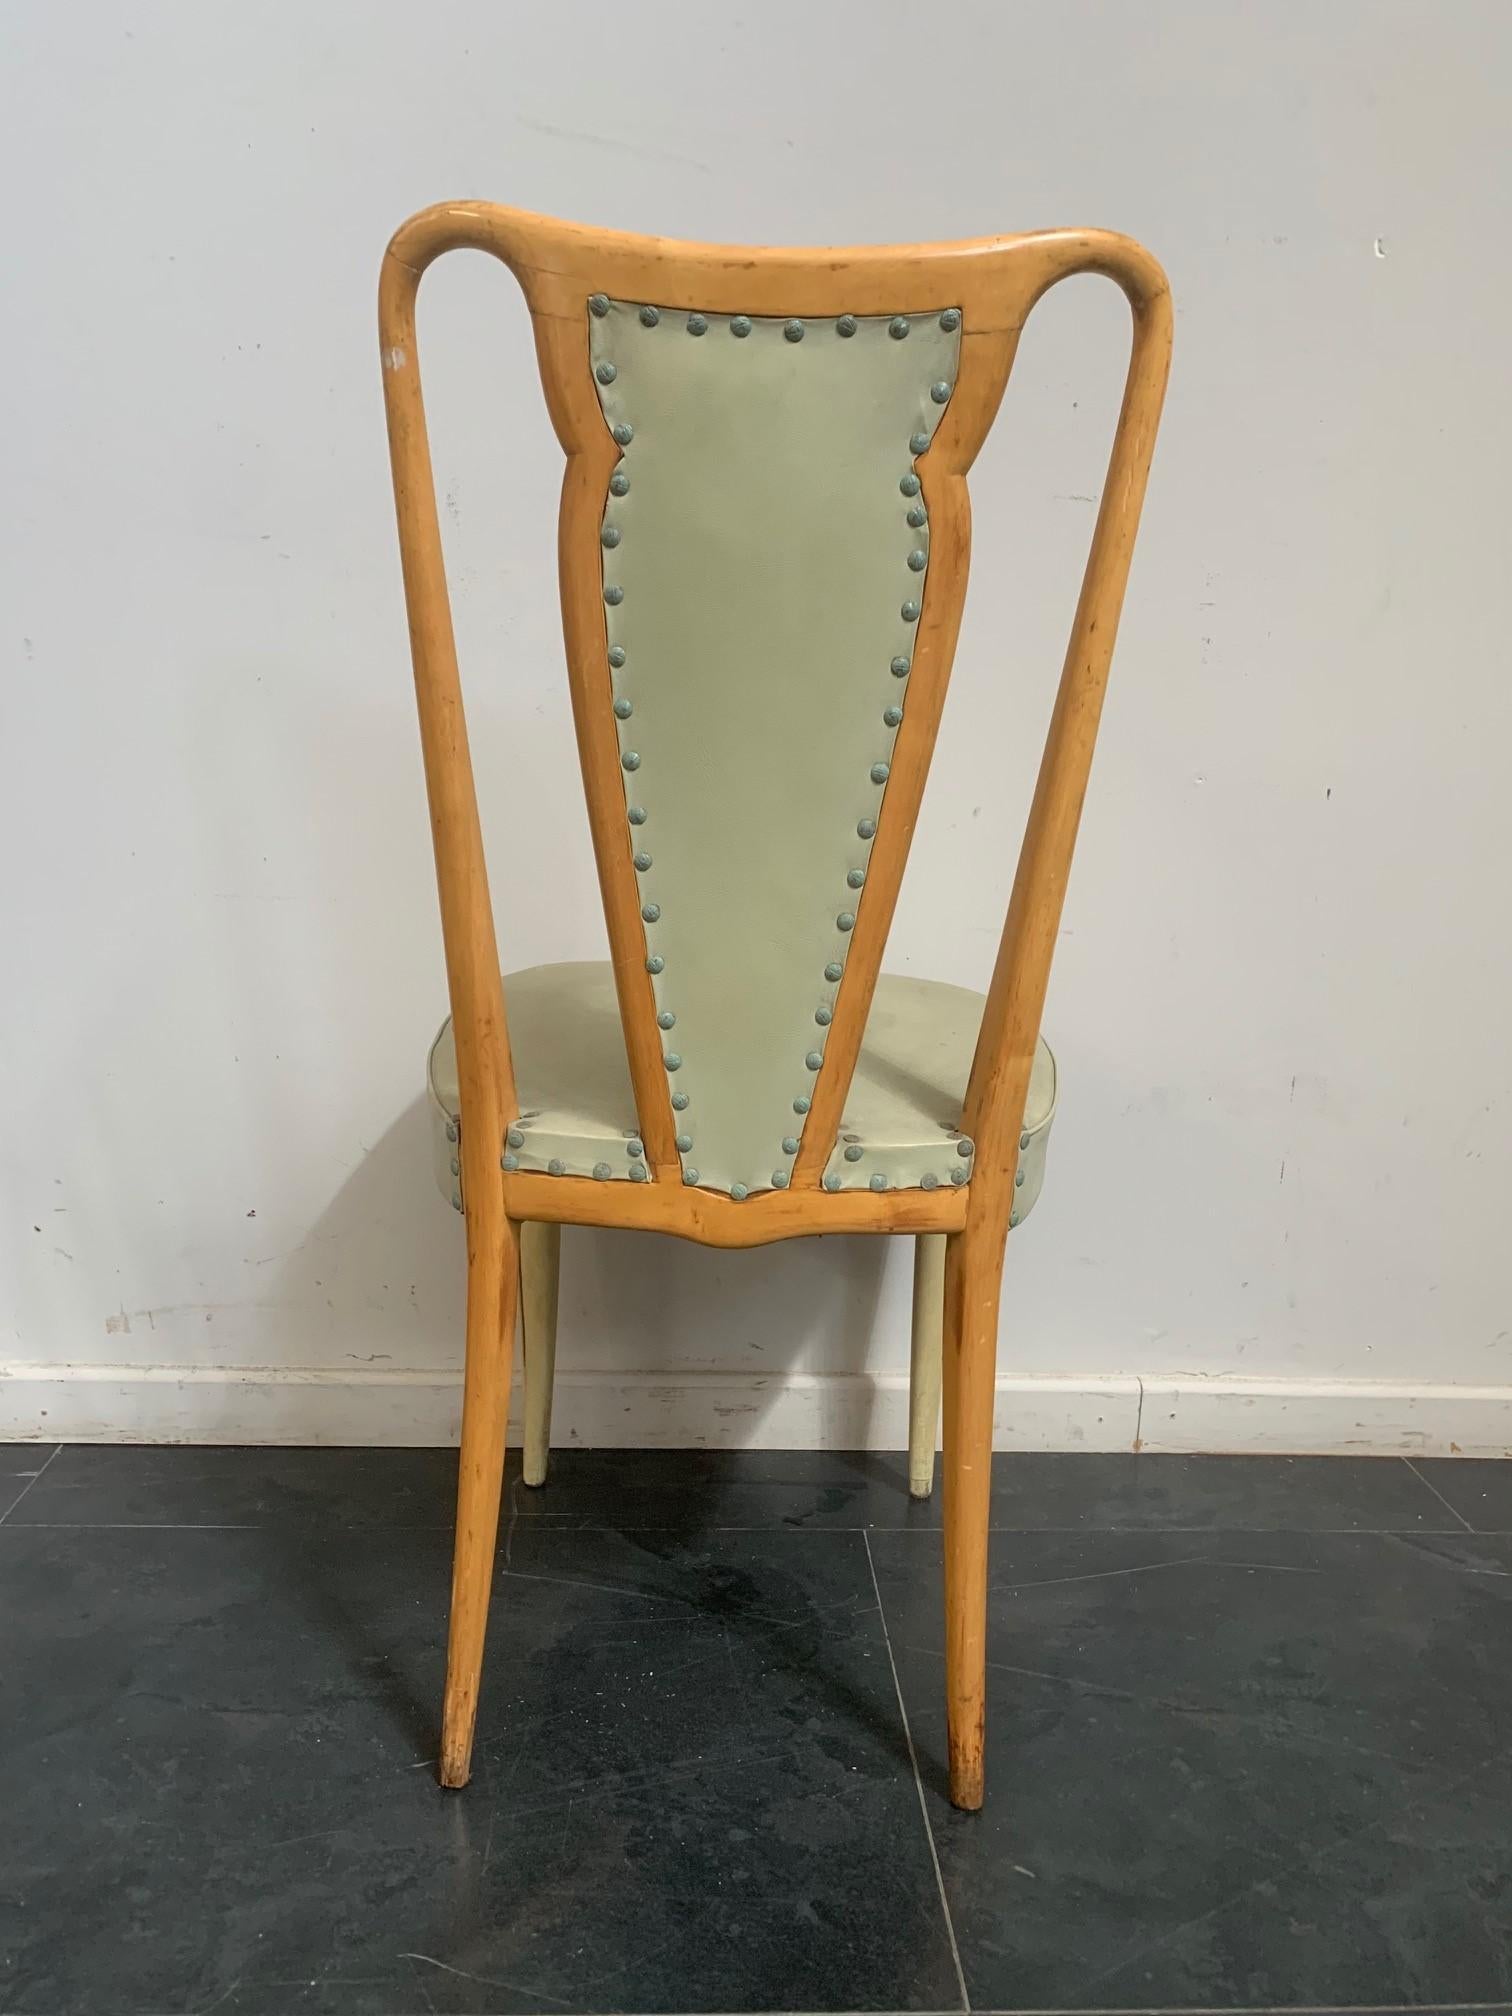 Mid-20th Century Italian Aniline Leather and Lacquer Dining Chair from La Permanente Mobili Cantù For Sale